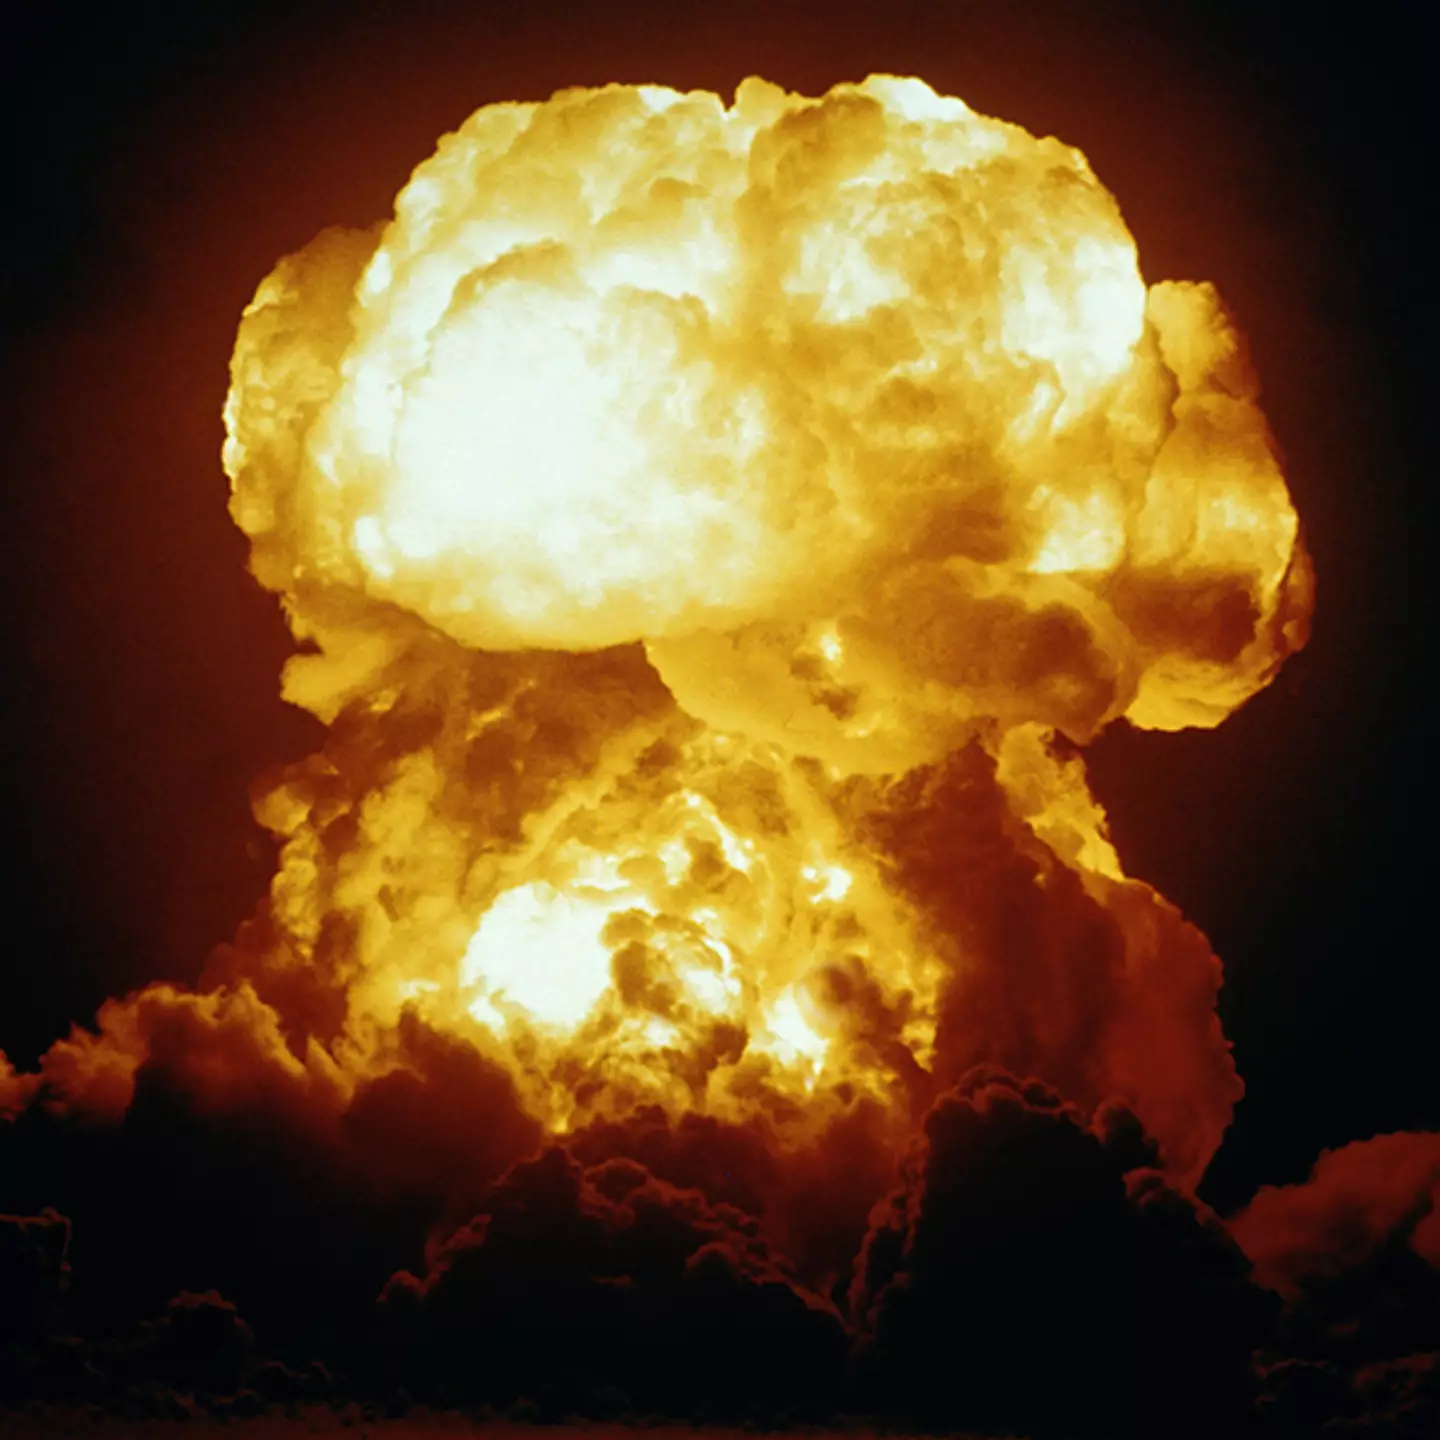 Animation comparing the sizes of famous explosions sends shivers down viewers’ spines